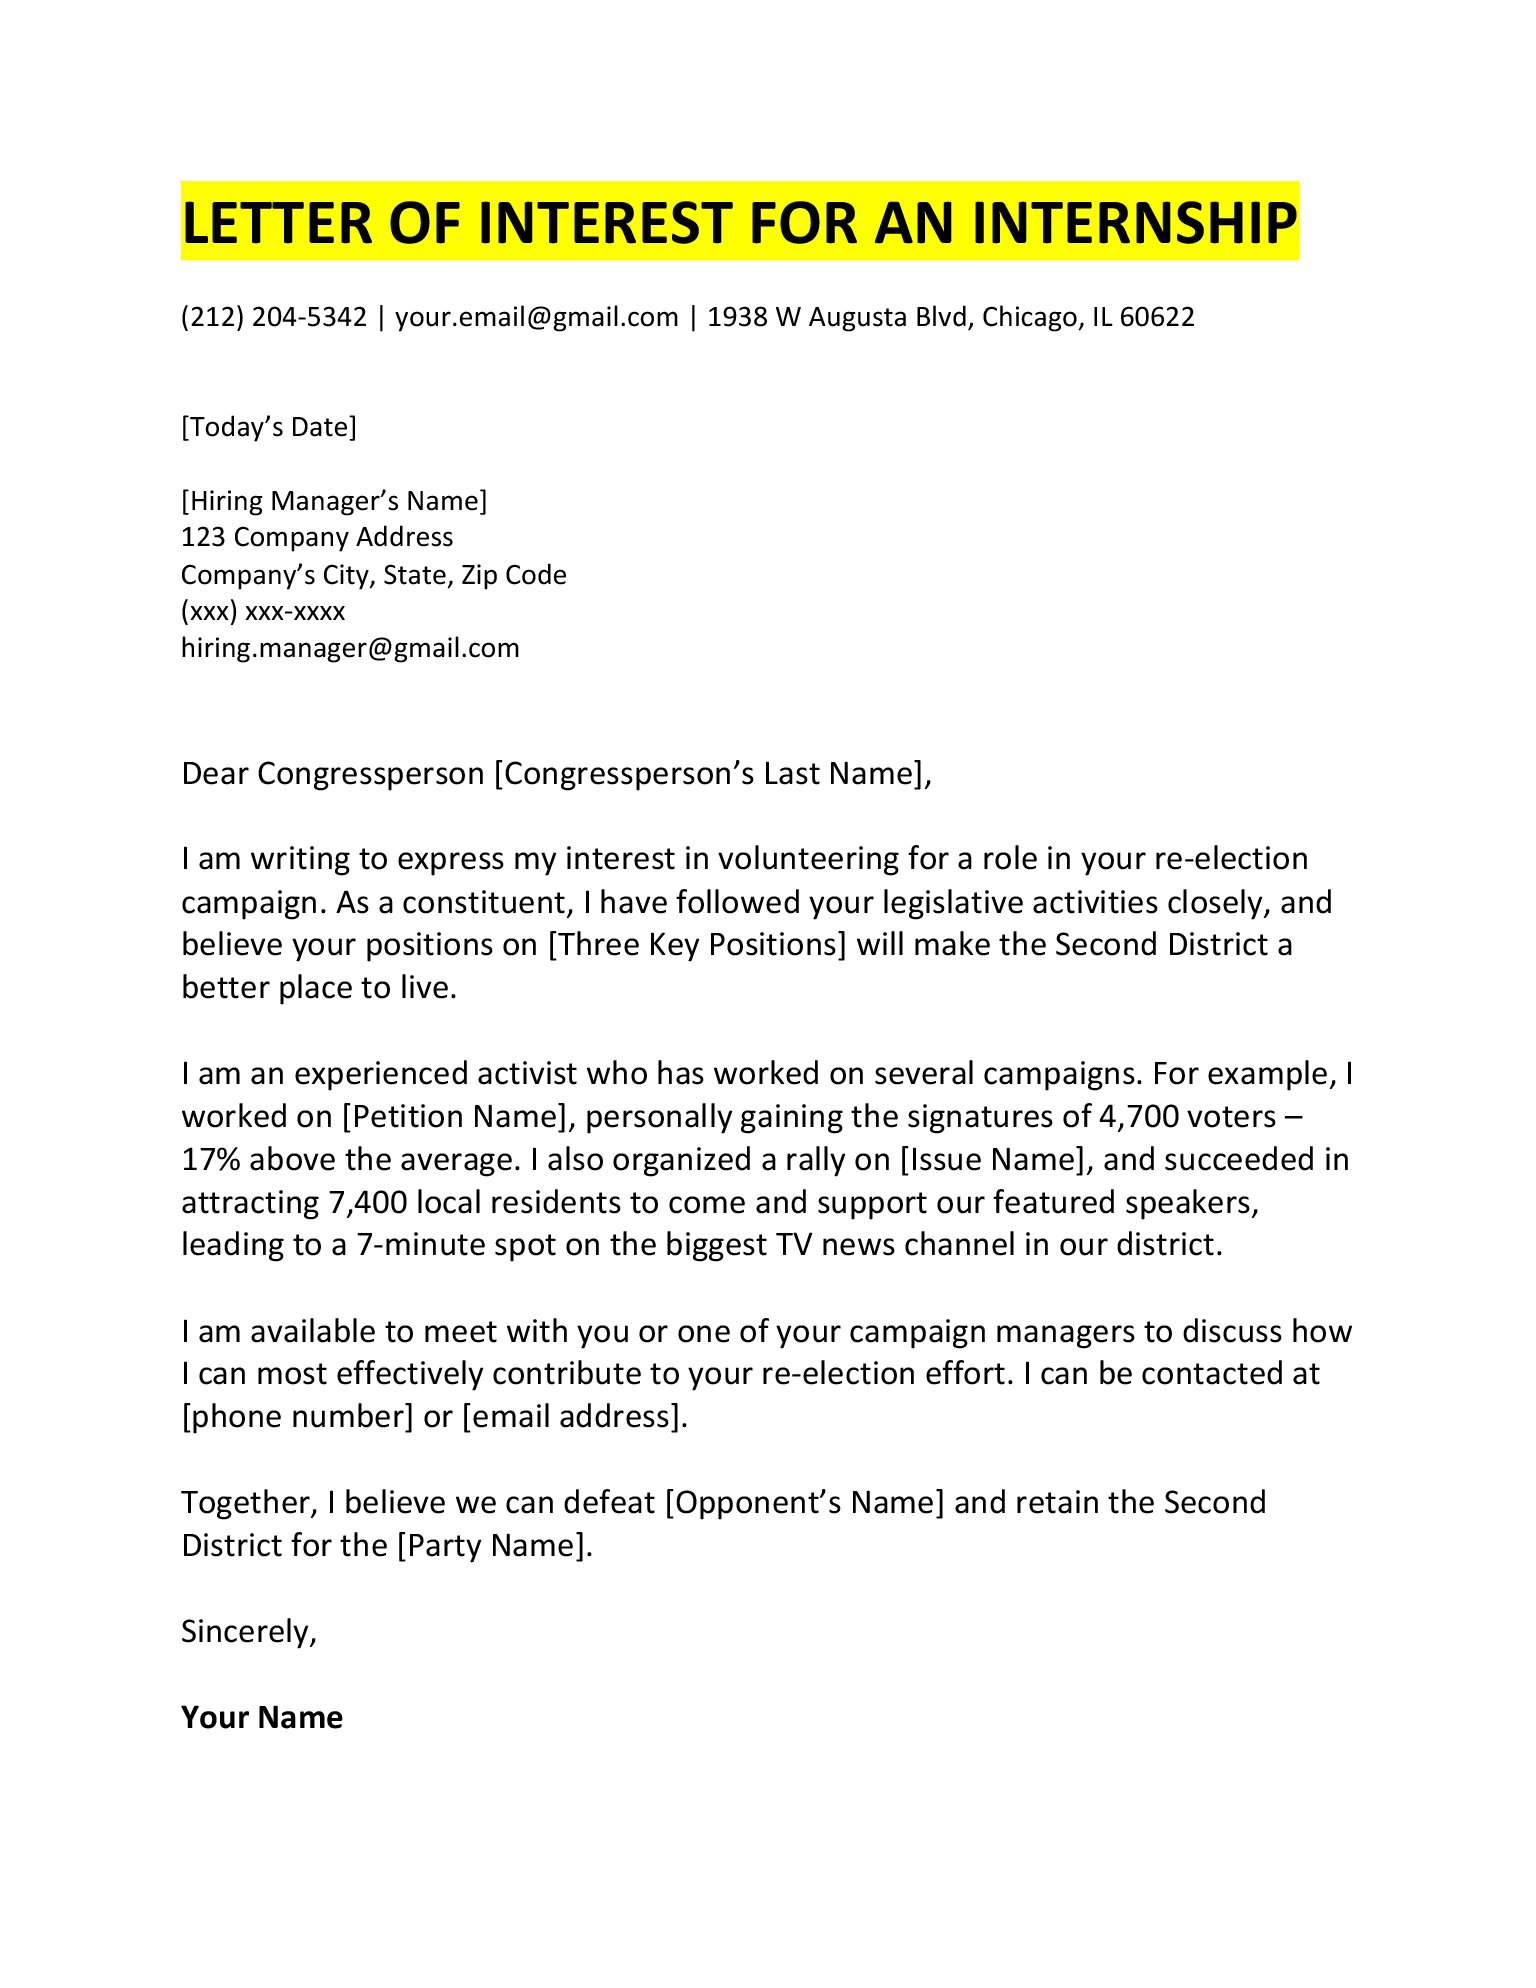 Example of a letter of interest for an internship.